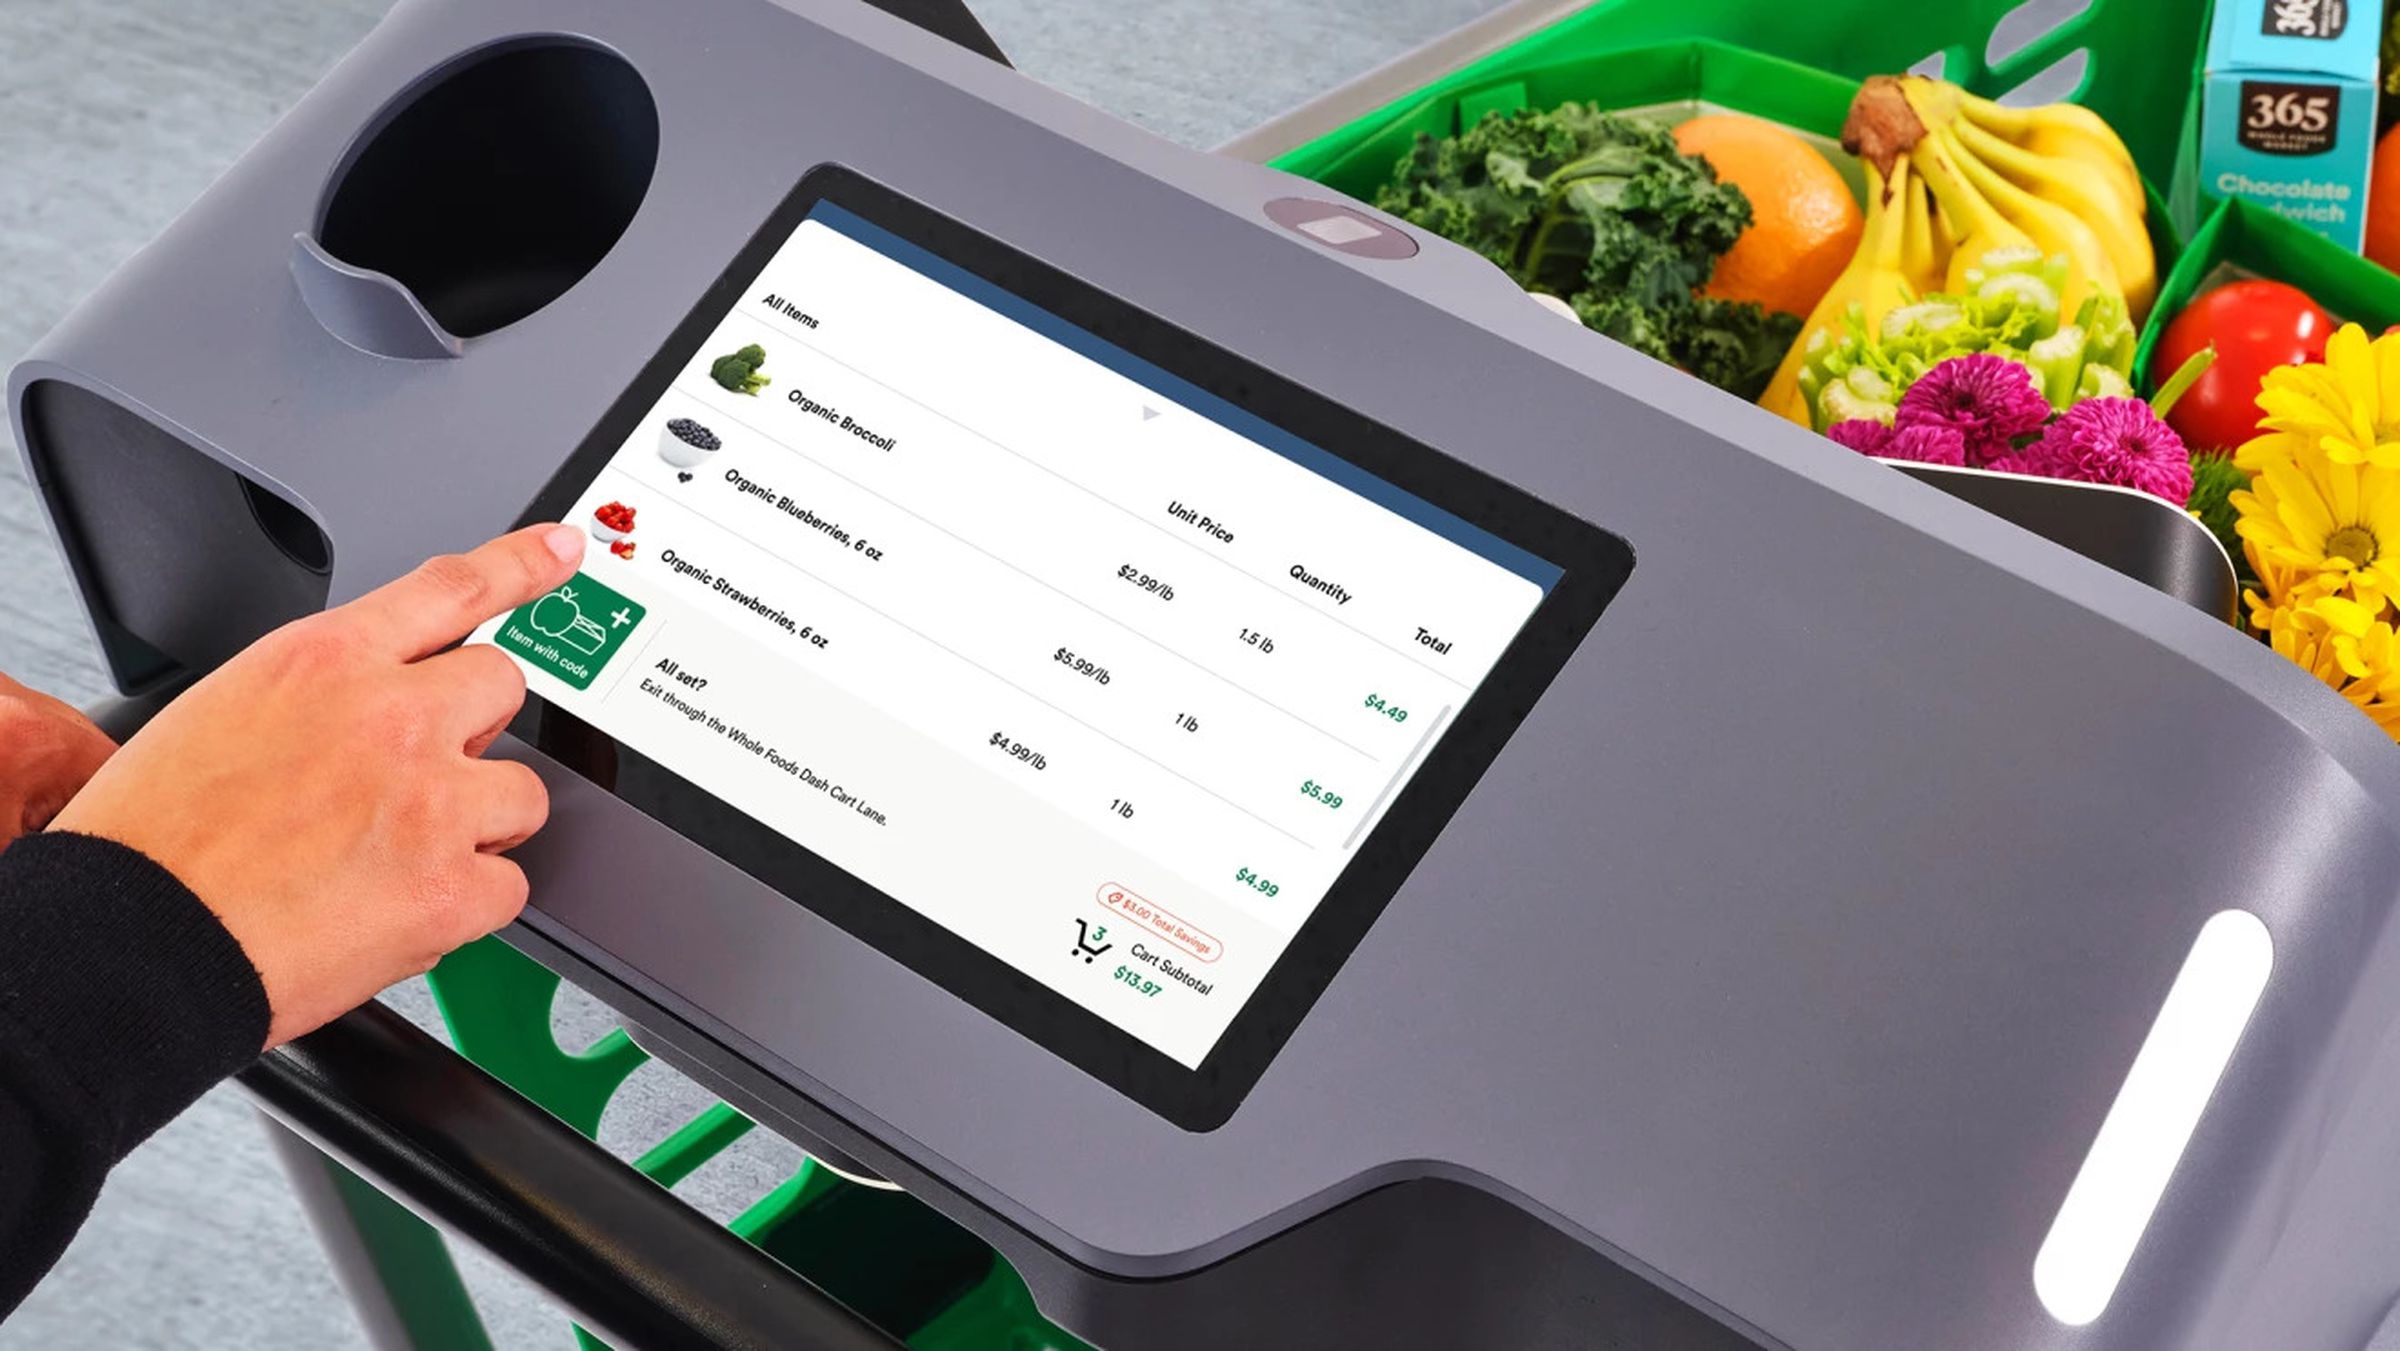 The Dash Cart has a touchscreen in the handlebars that shows shoppers a live receipt and suggests nearby products and deals. 